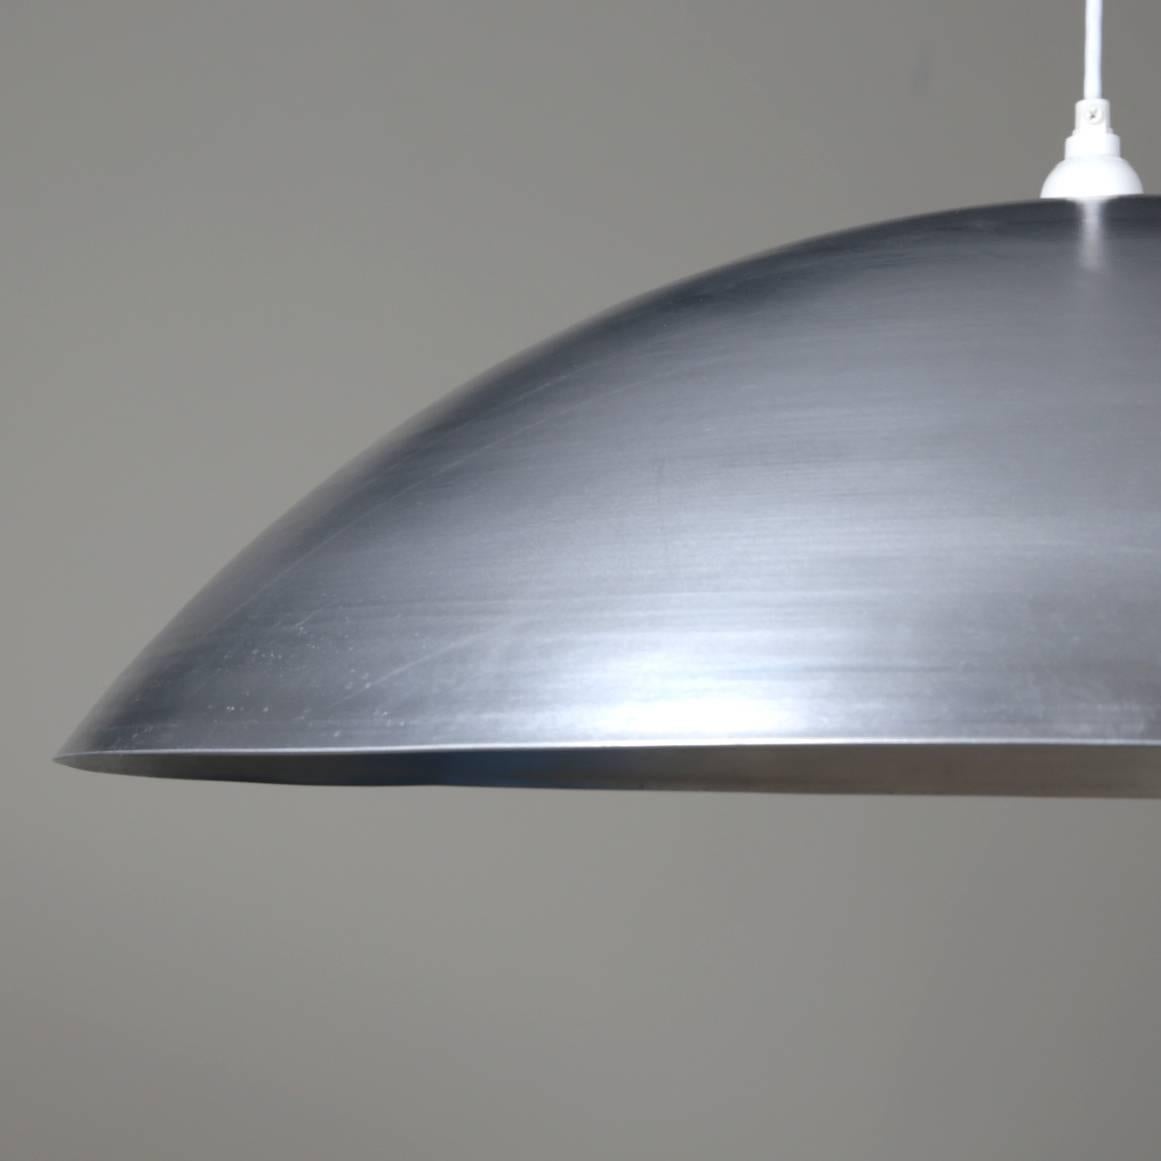 This listing is for 1x Industry Pendant in Waxed Aluminum by RESEARCH Lighting. We can customize the color to almost any RAL color.

Materials: Aluminum
Finish: Exterior & interior is powder coated in dark blue
Electronics: 1x E26 Socket, G40 Bulb